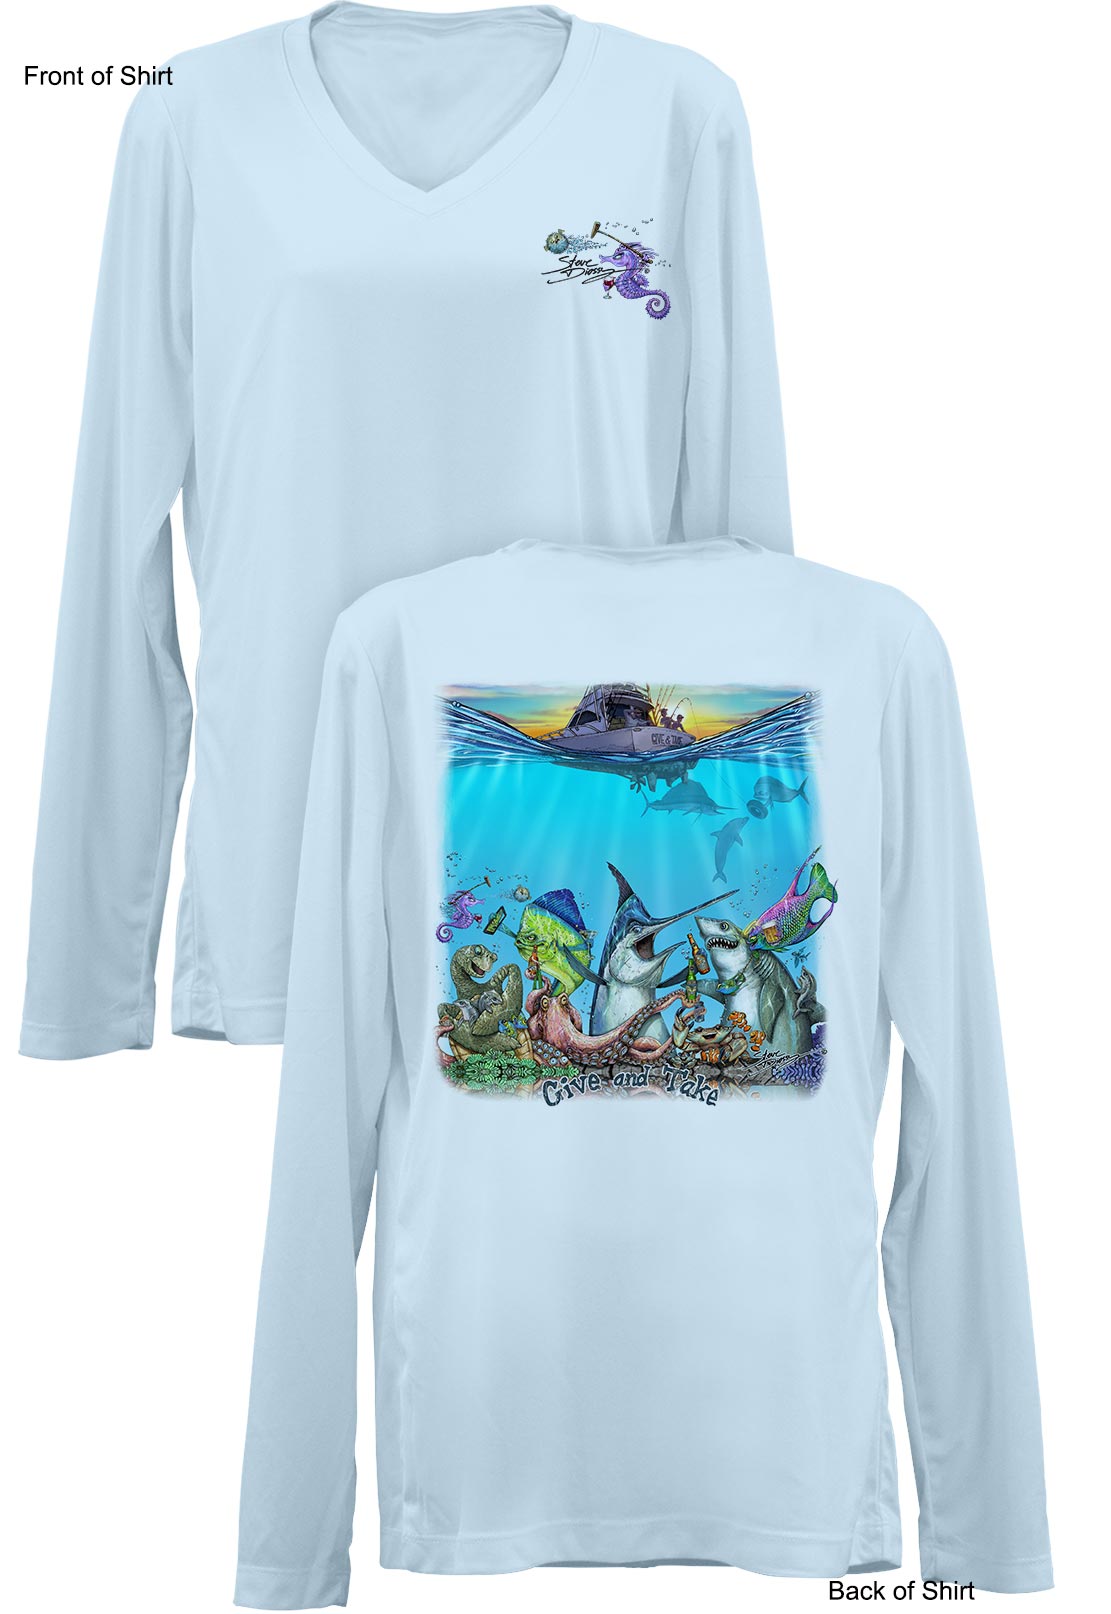 Give & Take- Ladies Long Sleeve V-Neck-100% Polyester